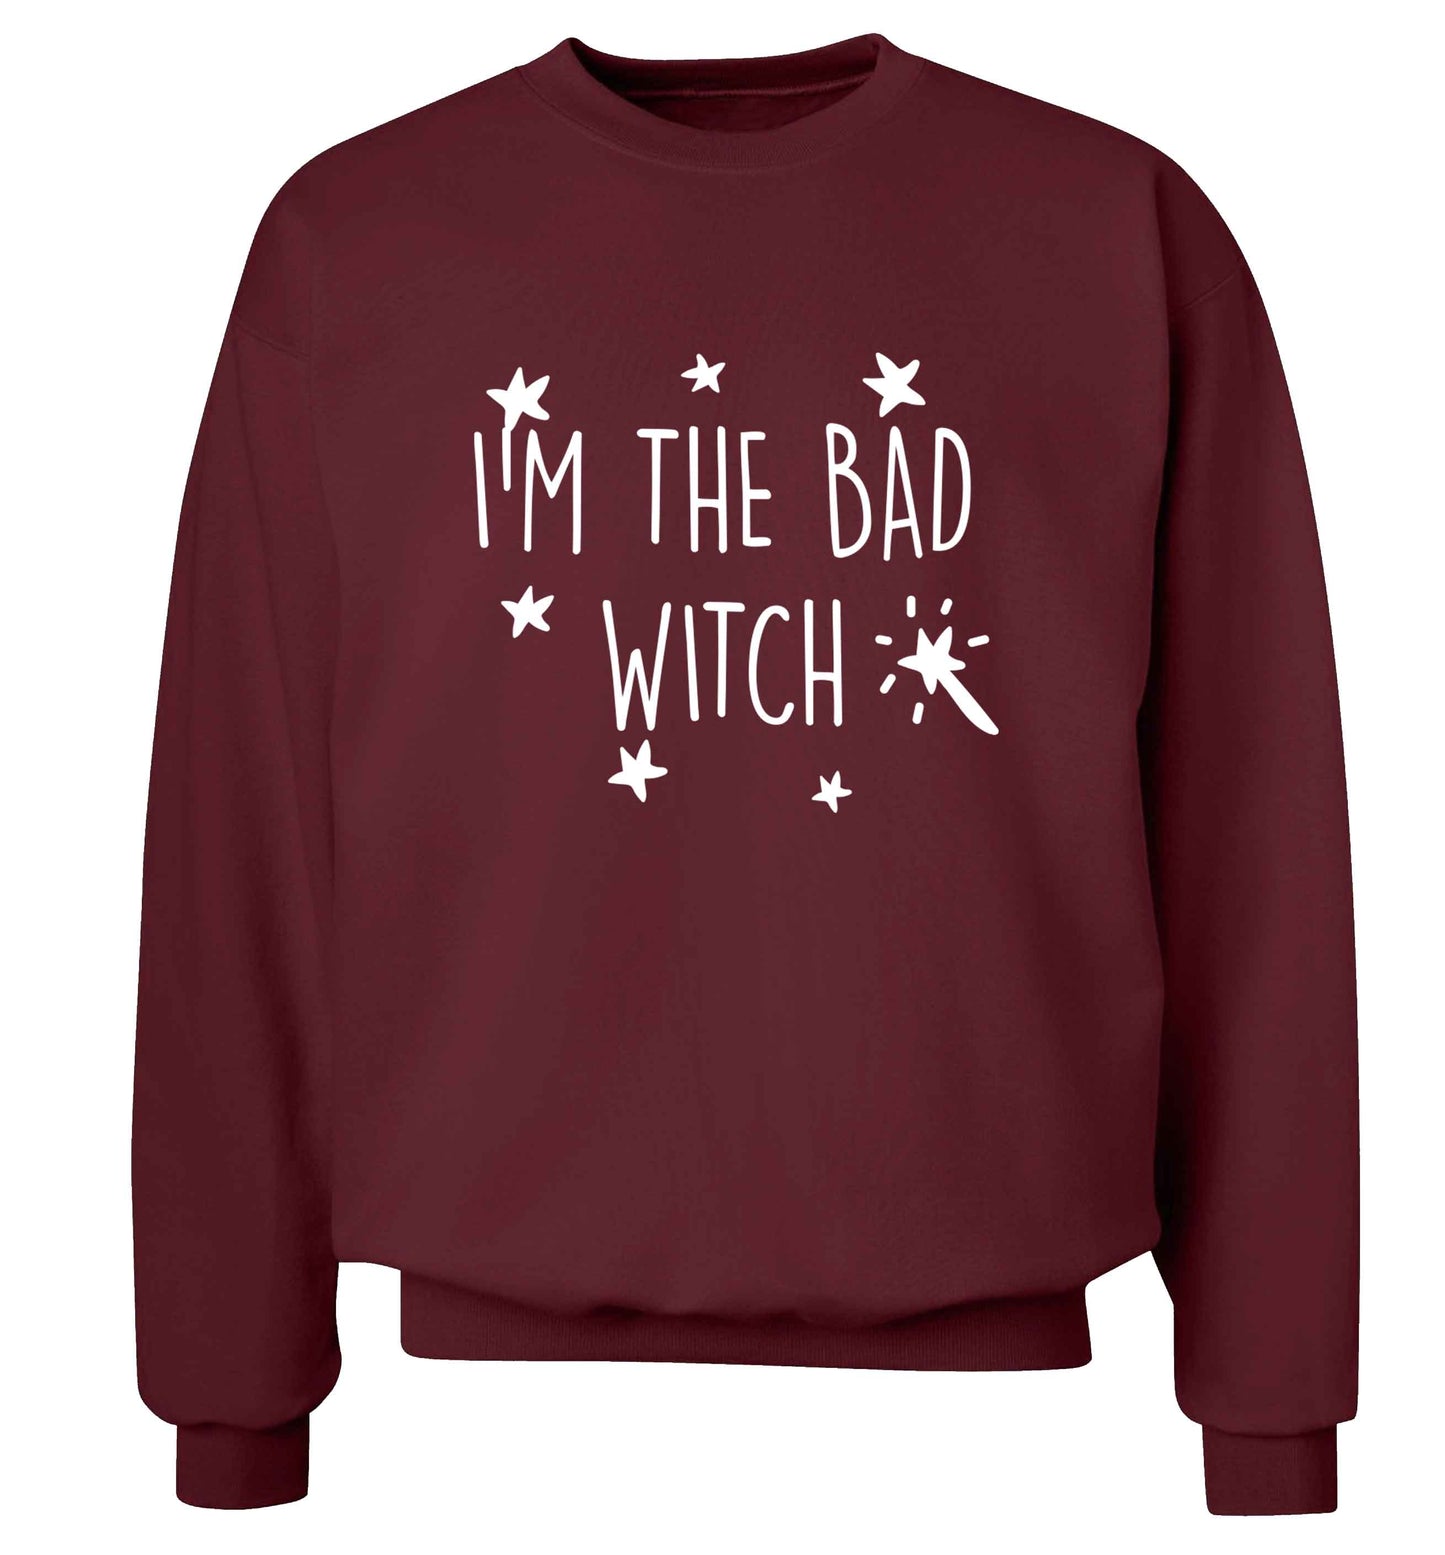 Bad witch adult's unisex maroon sweater 2XL